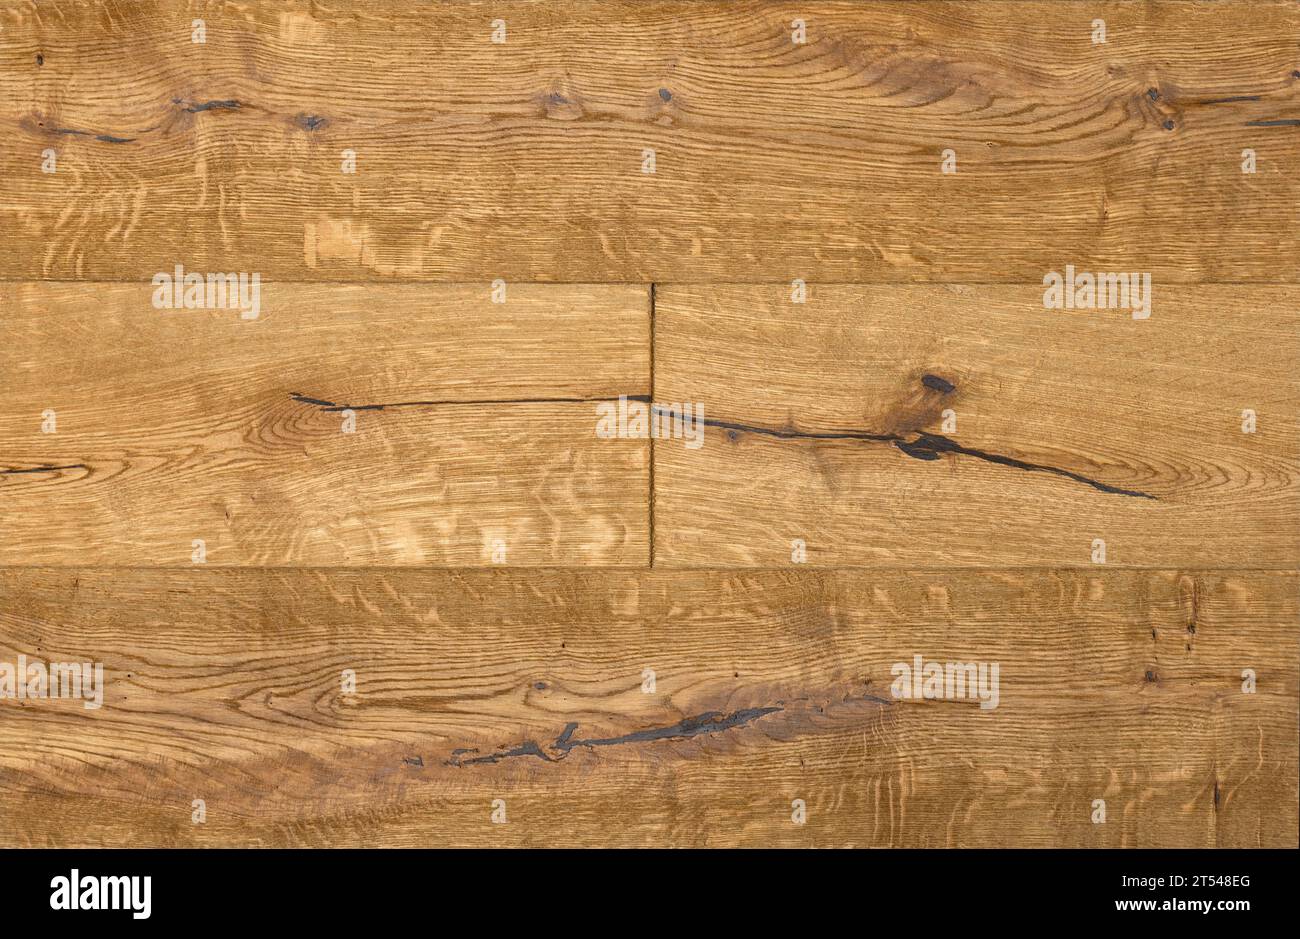 Wooden dark brown wooden structure. Reclaimed old wooden slats. Stock Photo